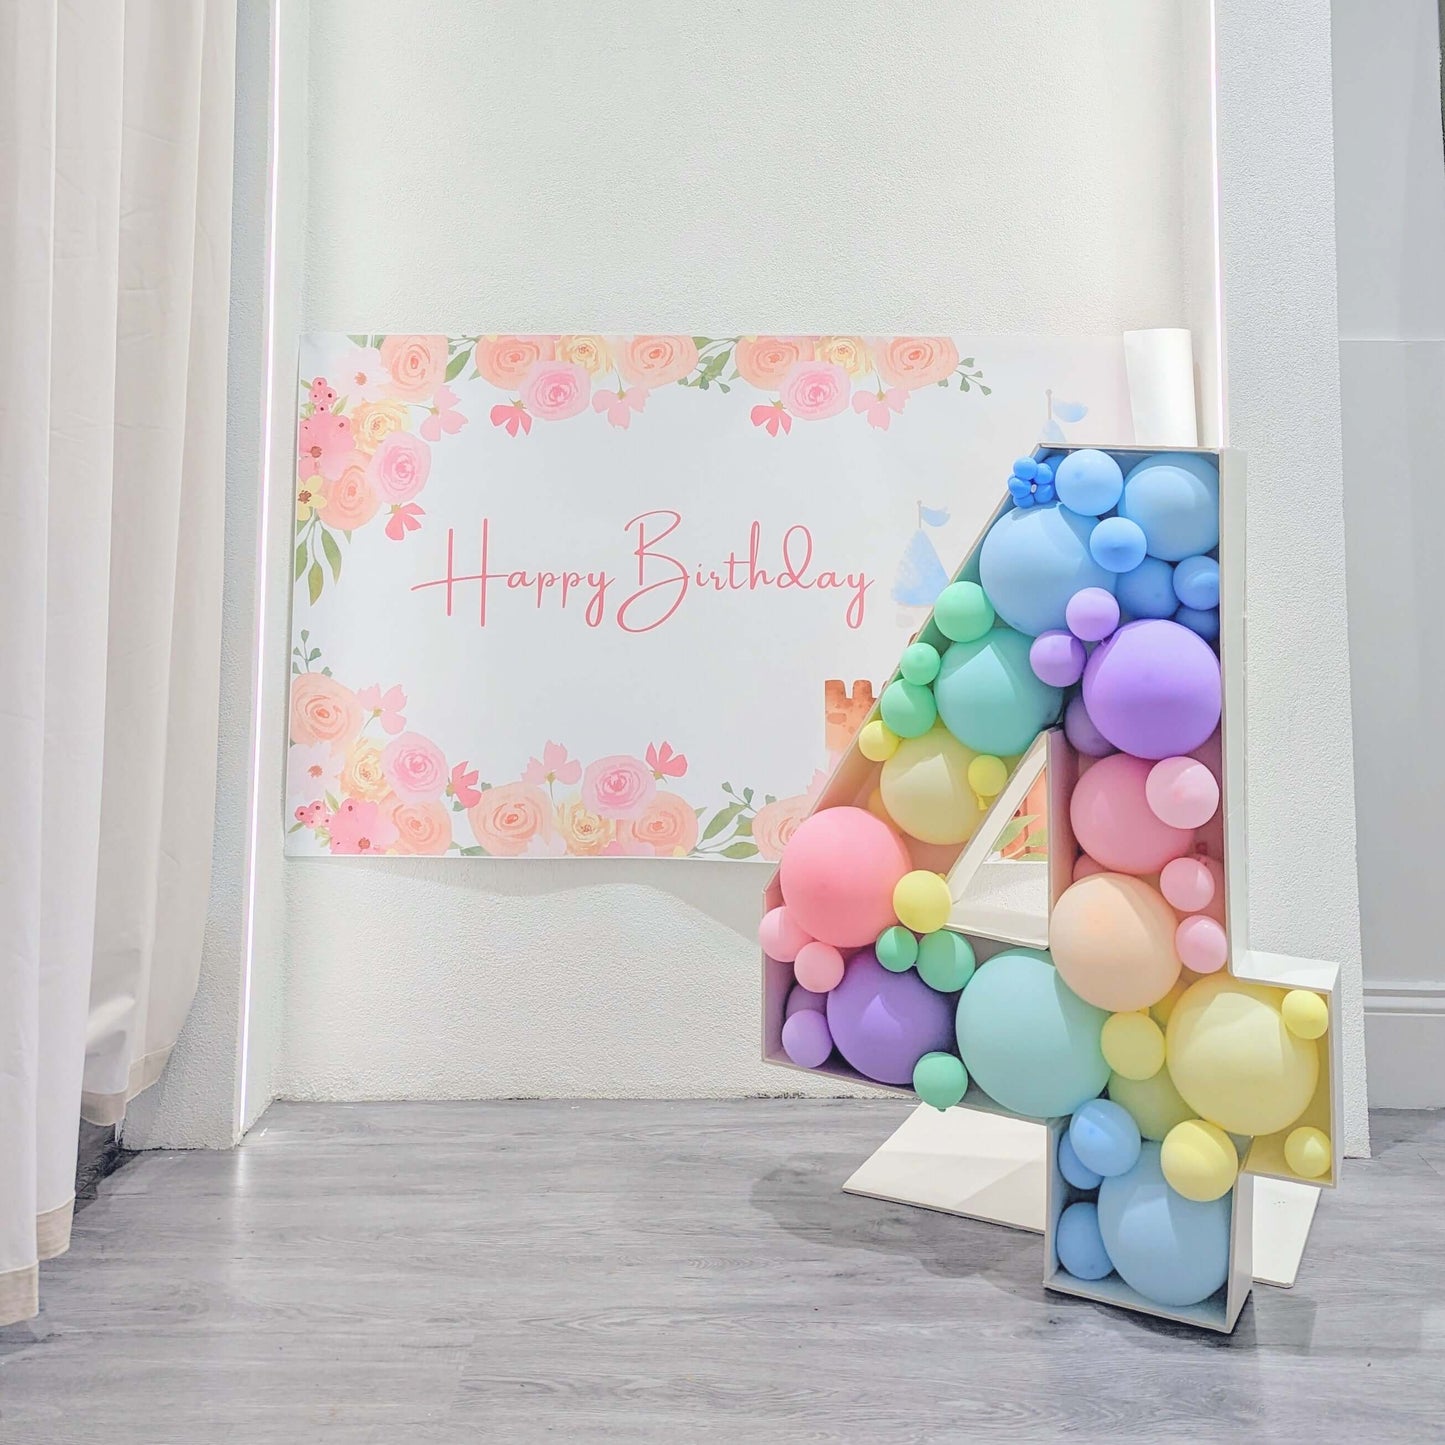 Phoenix Sweets Cakery - 3D Number with Balloon (Pastel Colour). Celebrate Birthday, Wedding, Baby Shower and Anniversary in Adelaide, South Australia with Delicate Designs. Gift Items also available.